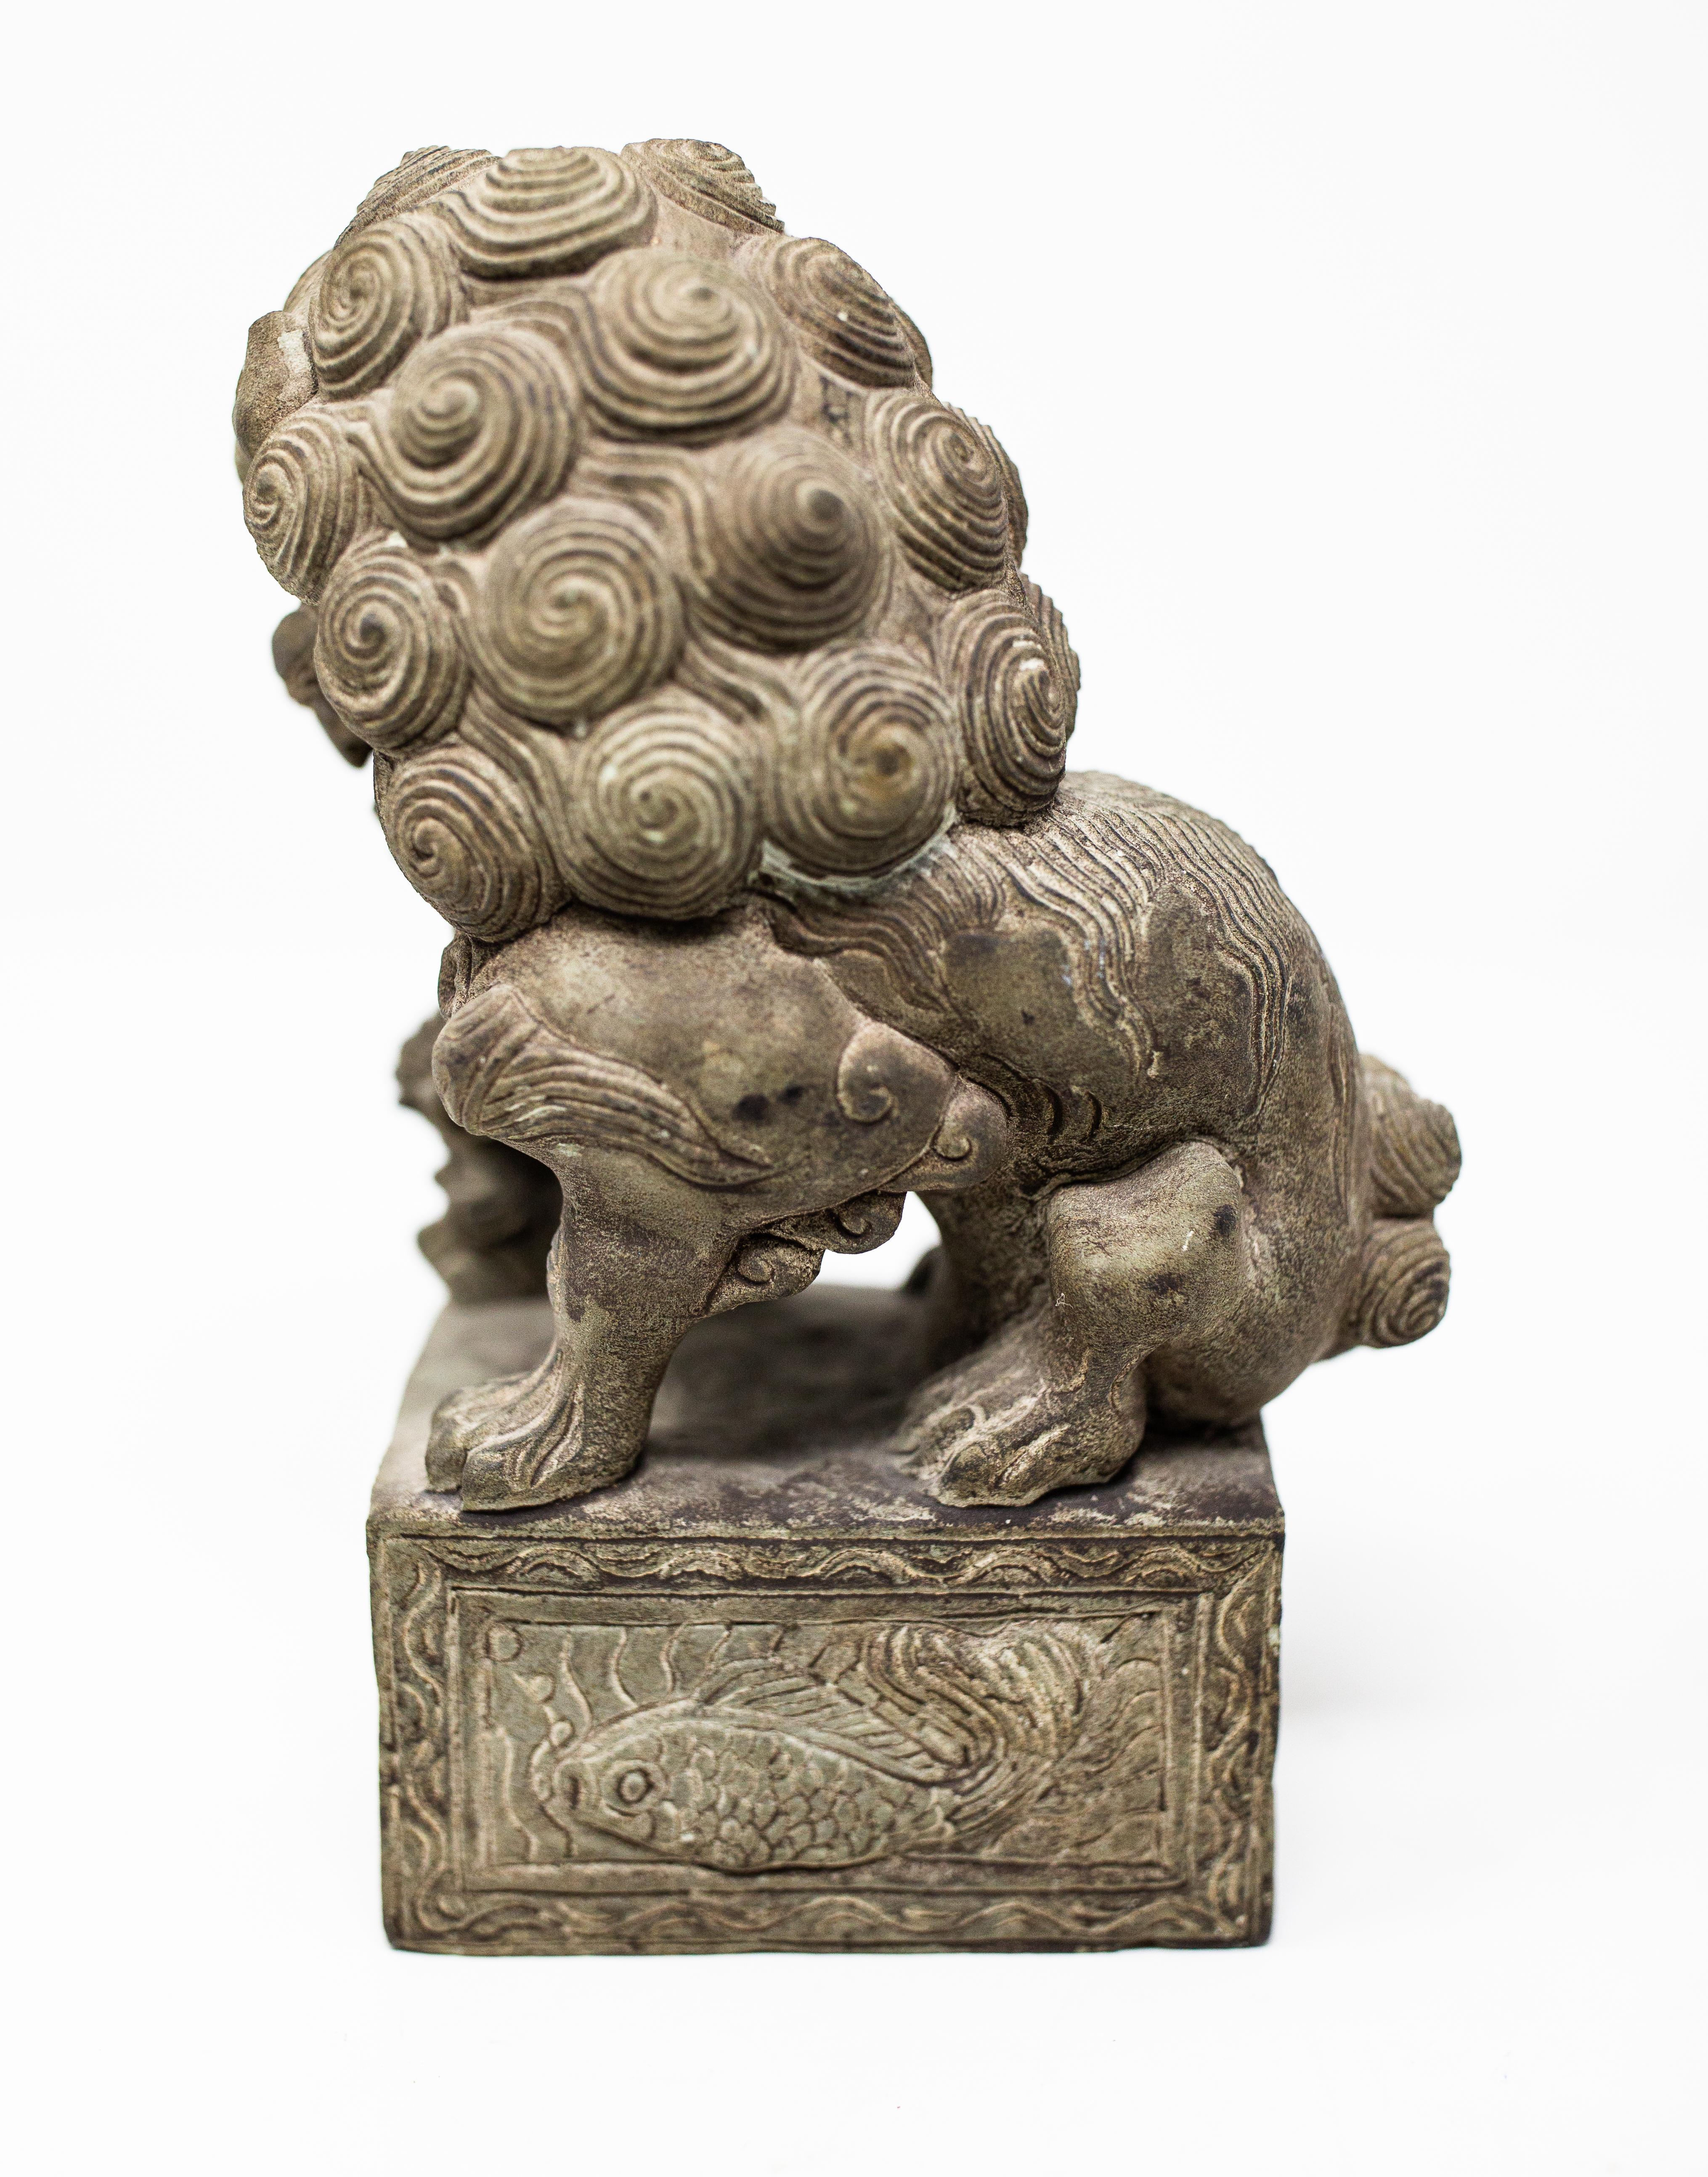 Offering this stunning hand carved stone foo dog. The foo dog is intricately carved with all the details. The base has fish that are carved all the way around. The foo dog is in its standard pose with one paw on a ball.